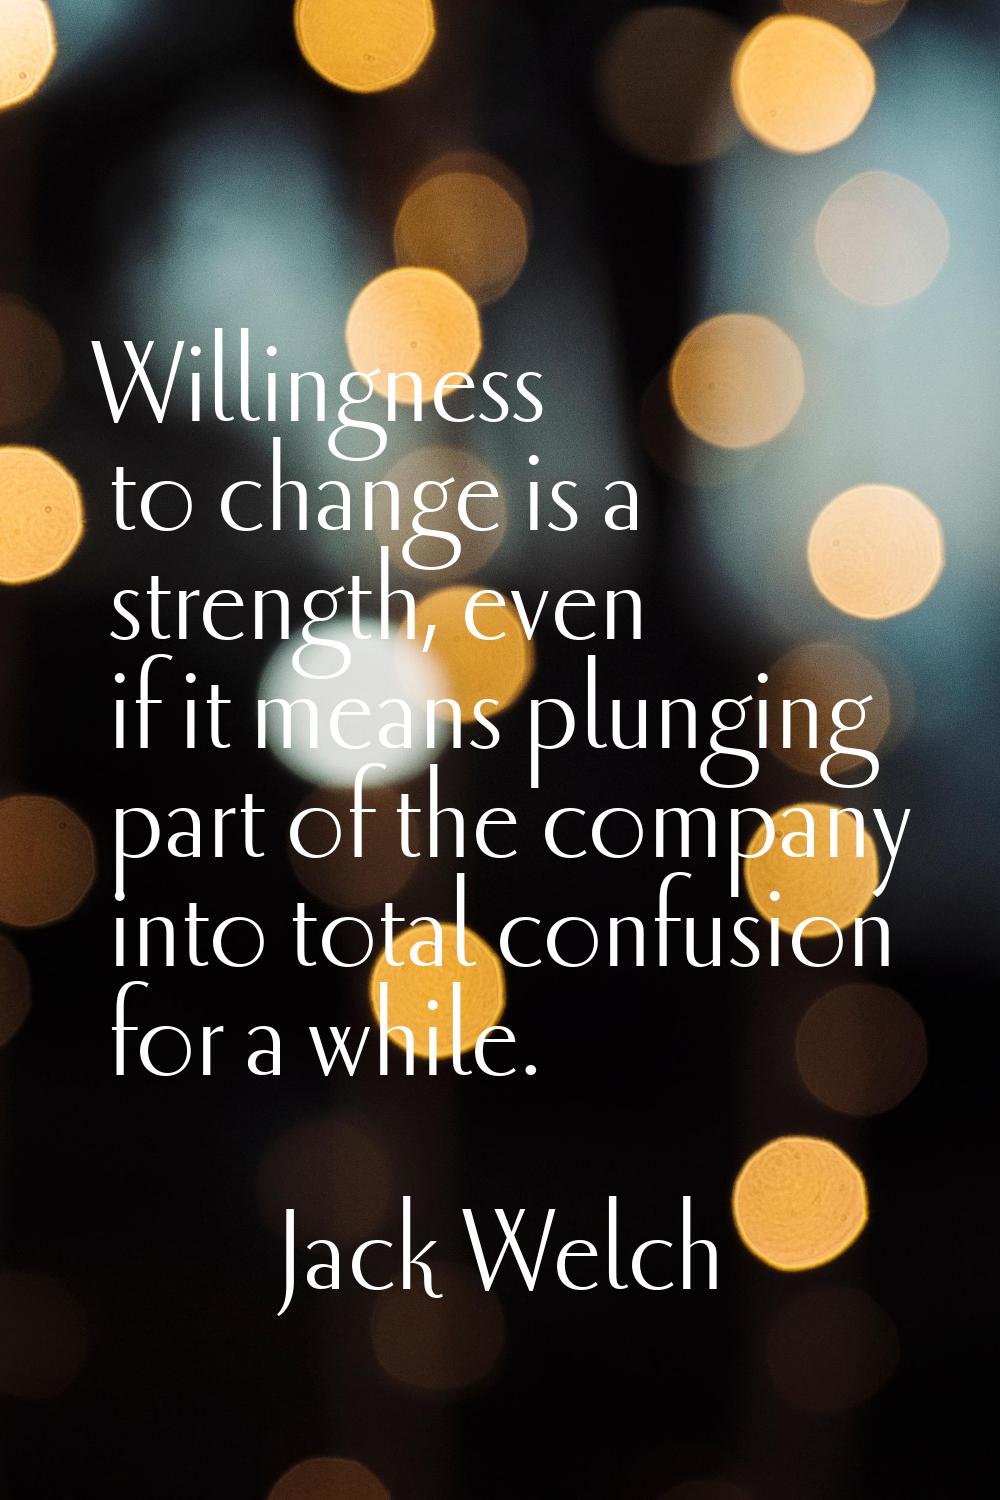 Willingness to change is a strength, even if it means plunging part of the company into total confu